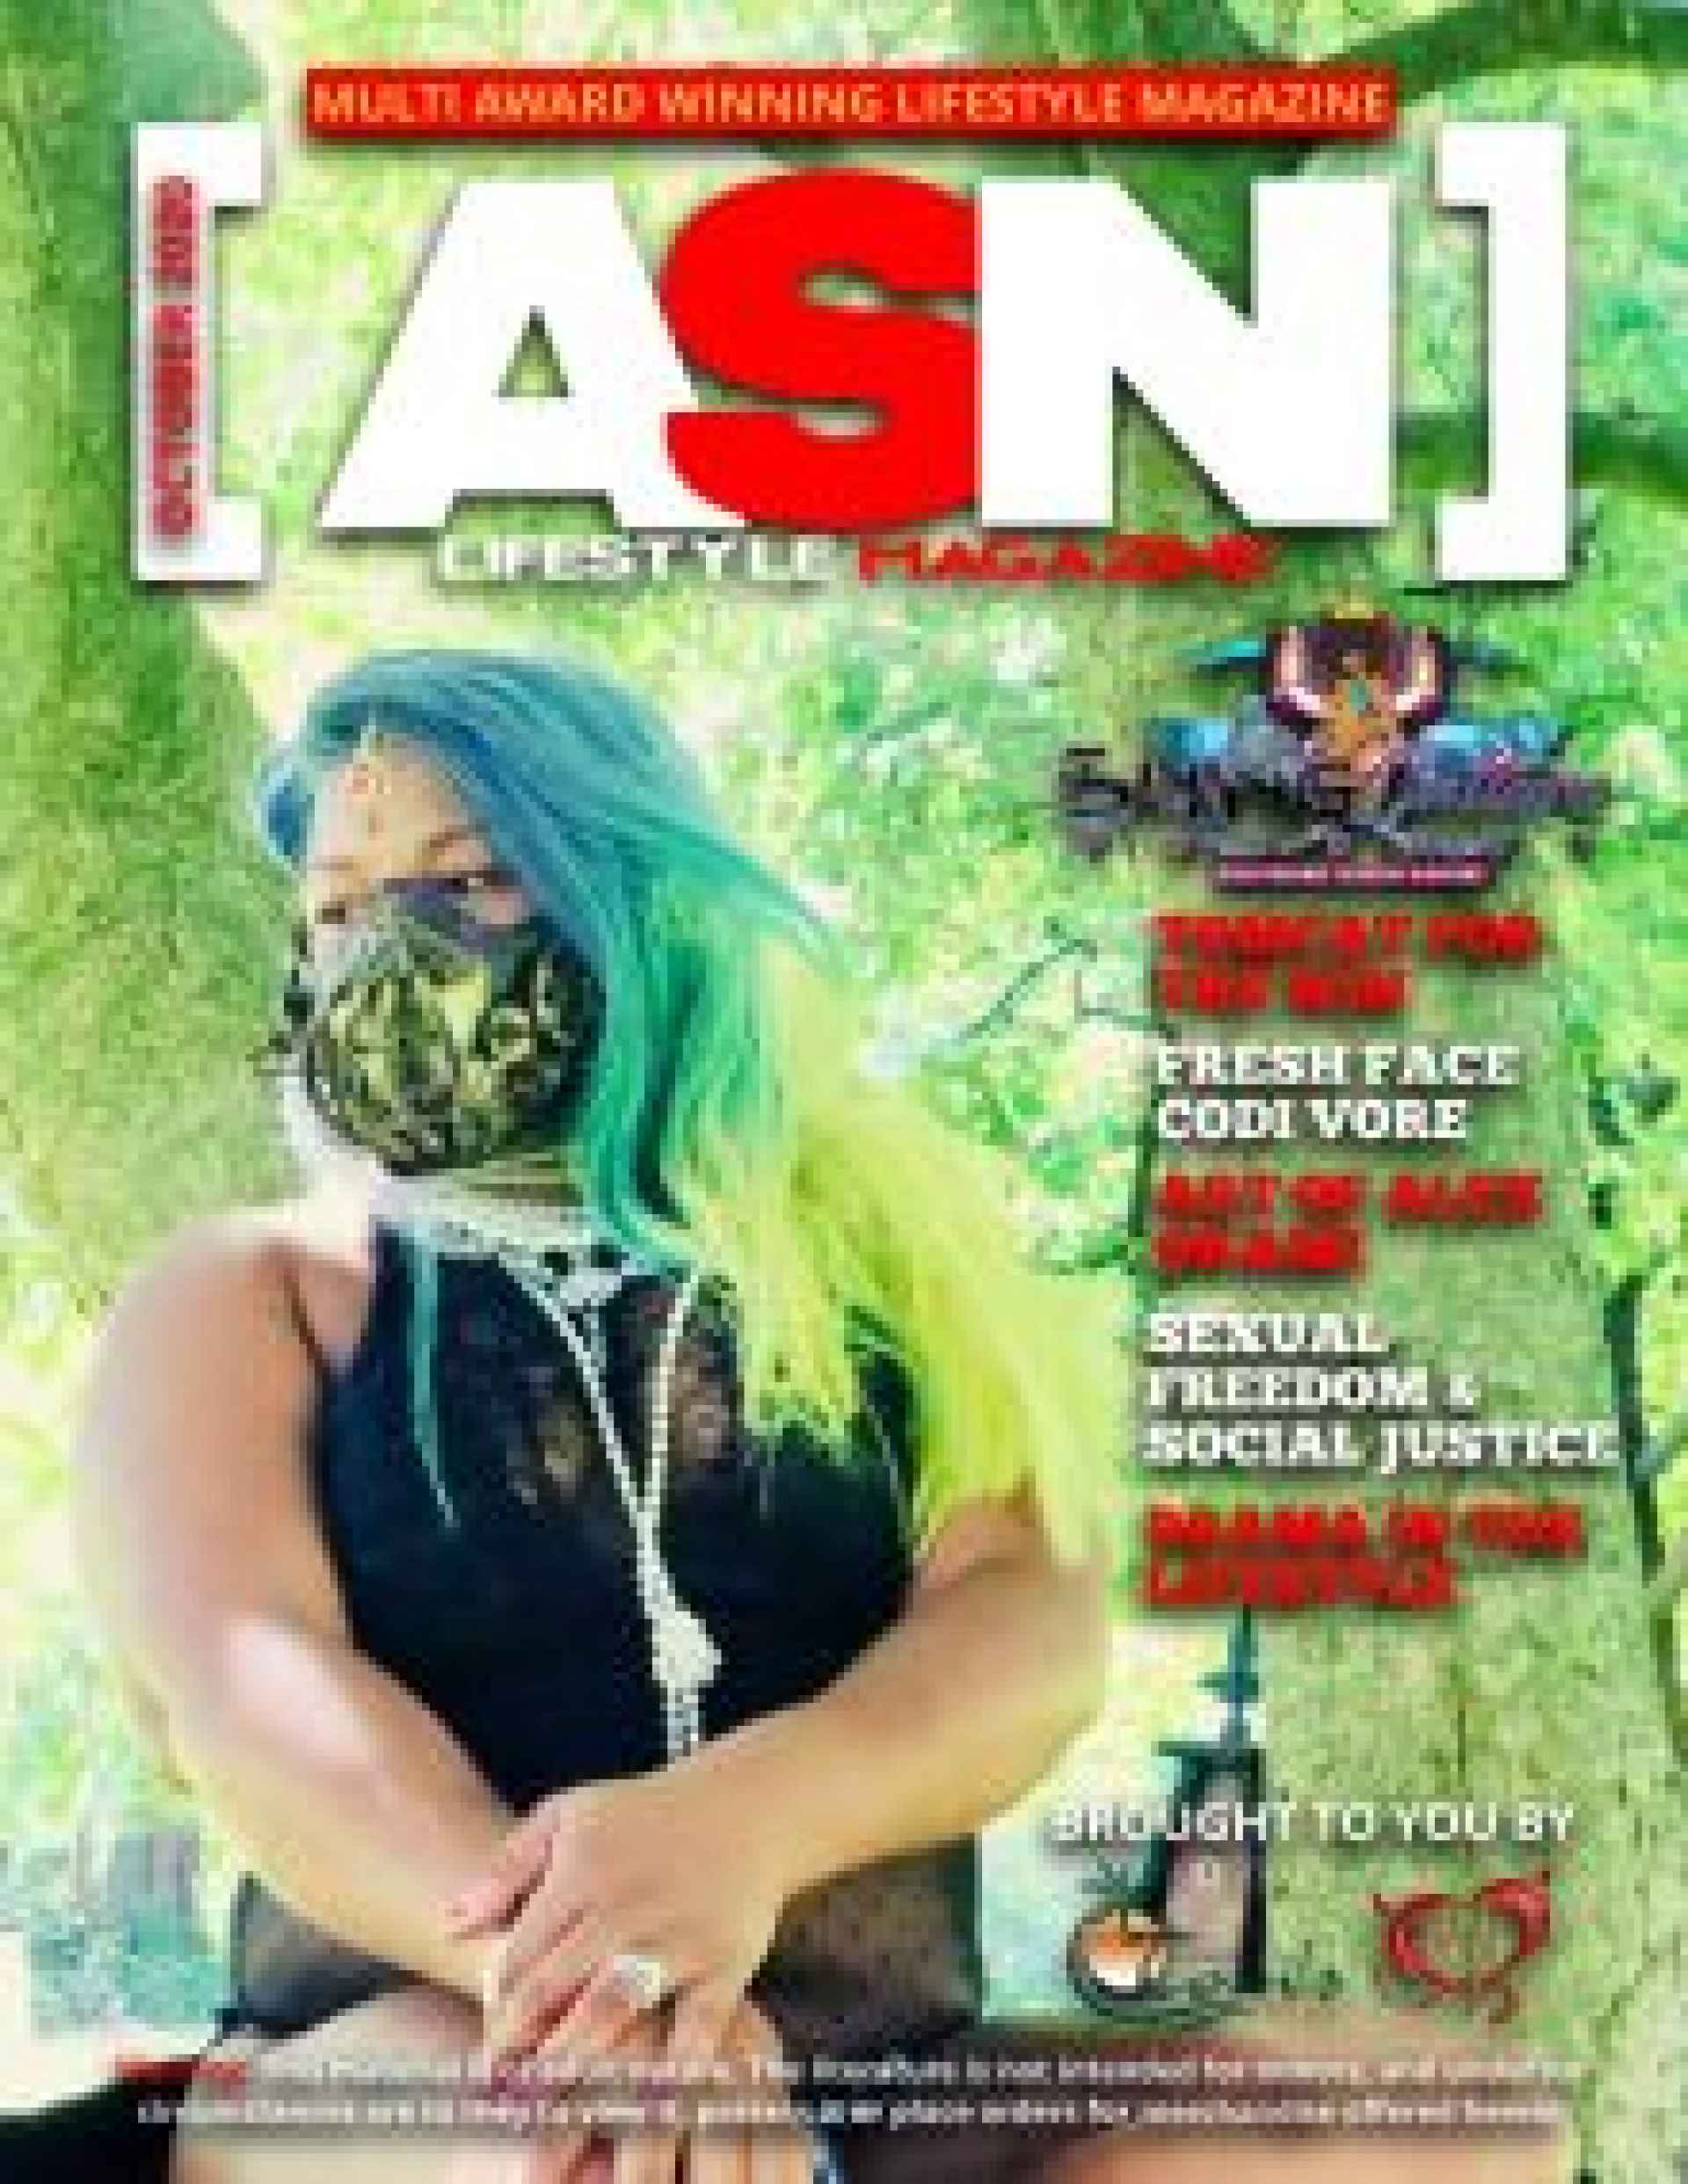 ASN Lifestyle Magazine October 2020 Issue Cover